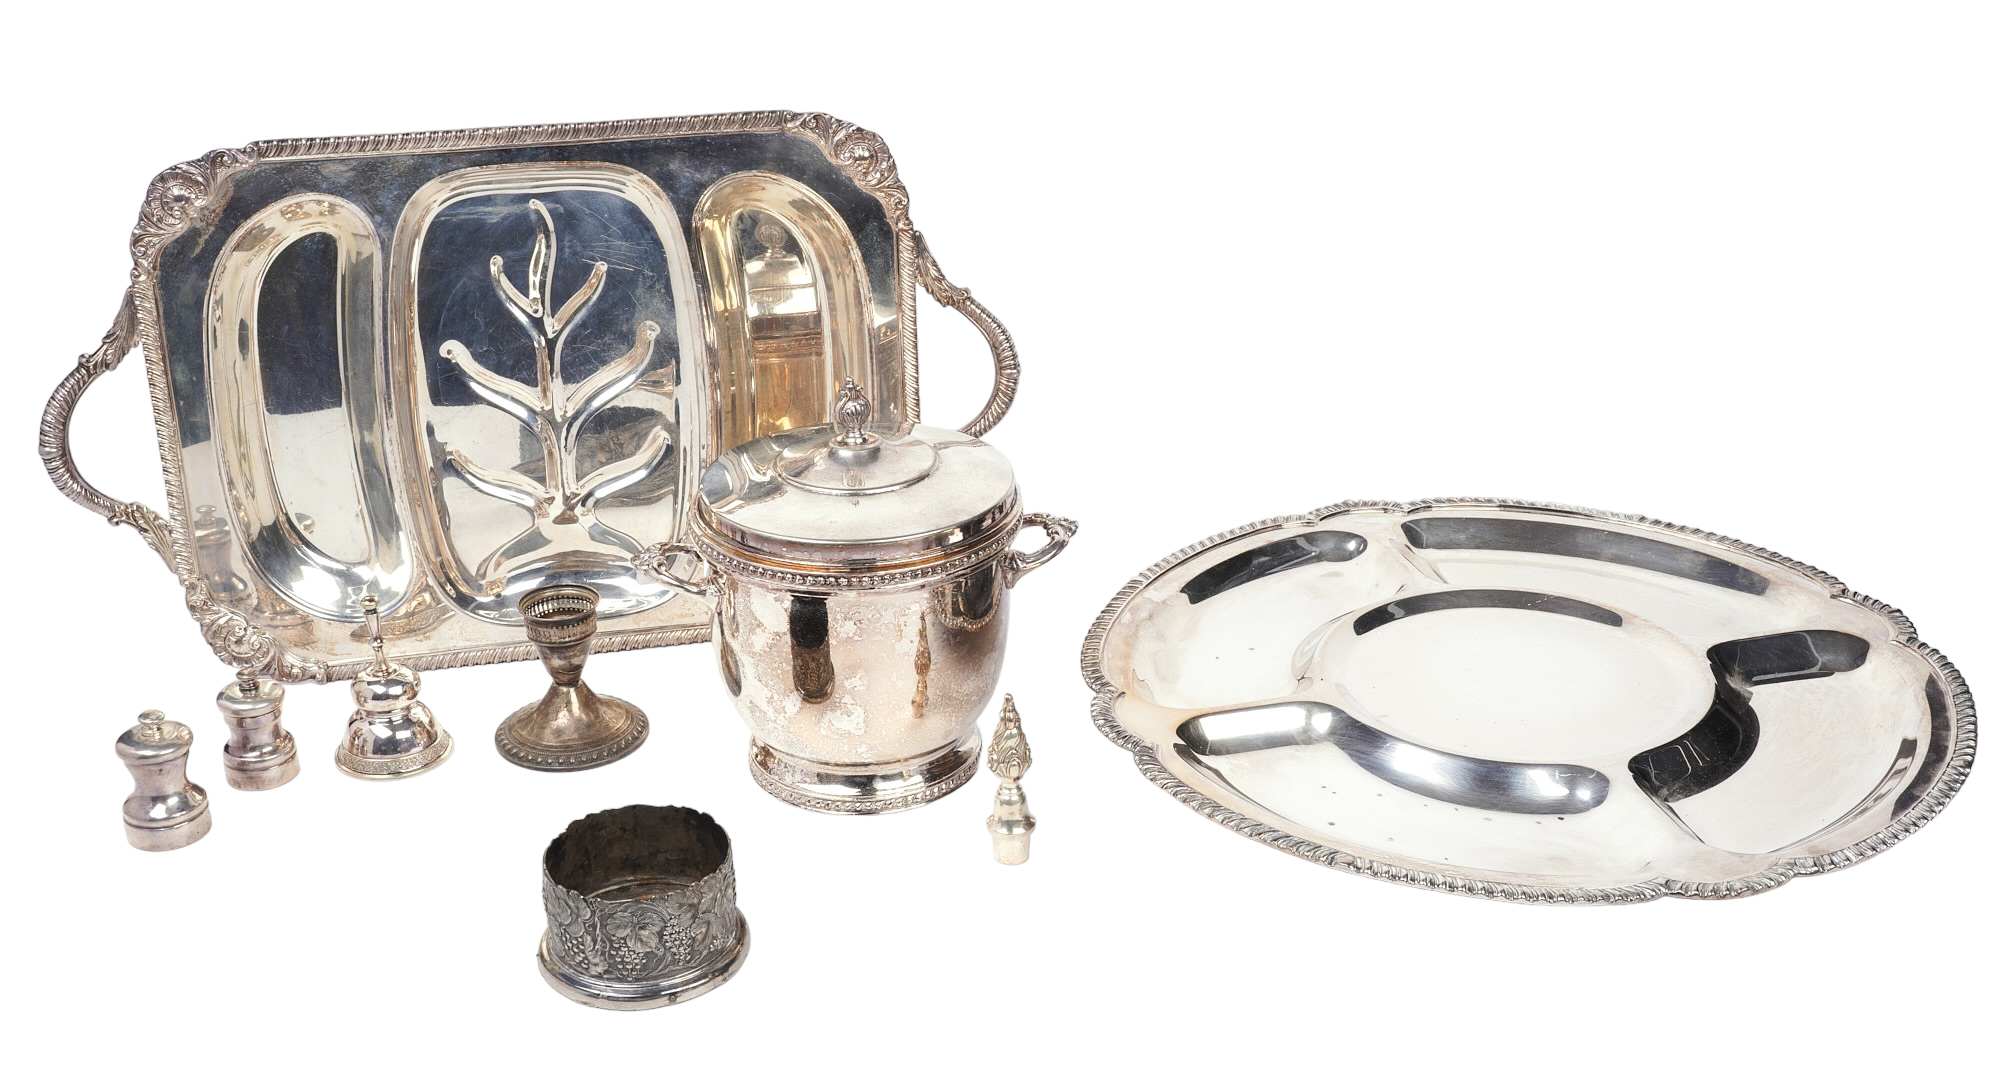 Silverplated trays and table items 2e2024